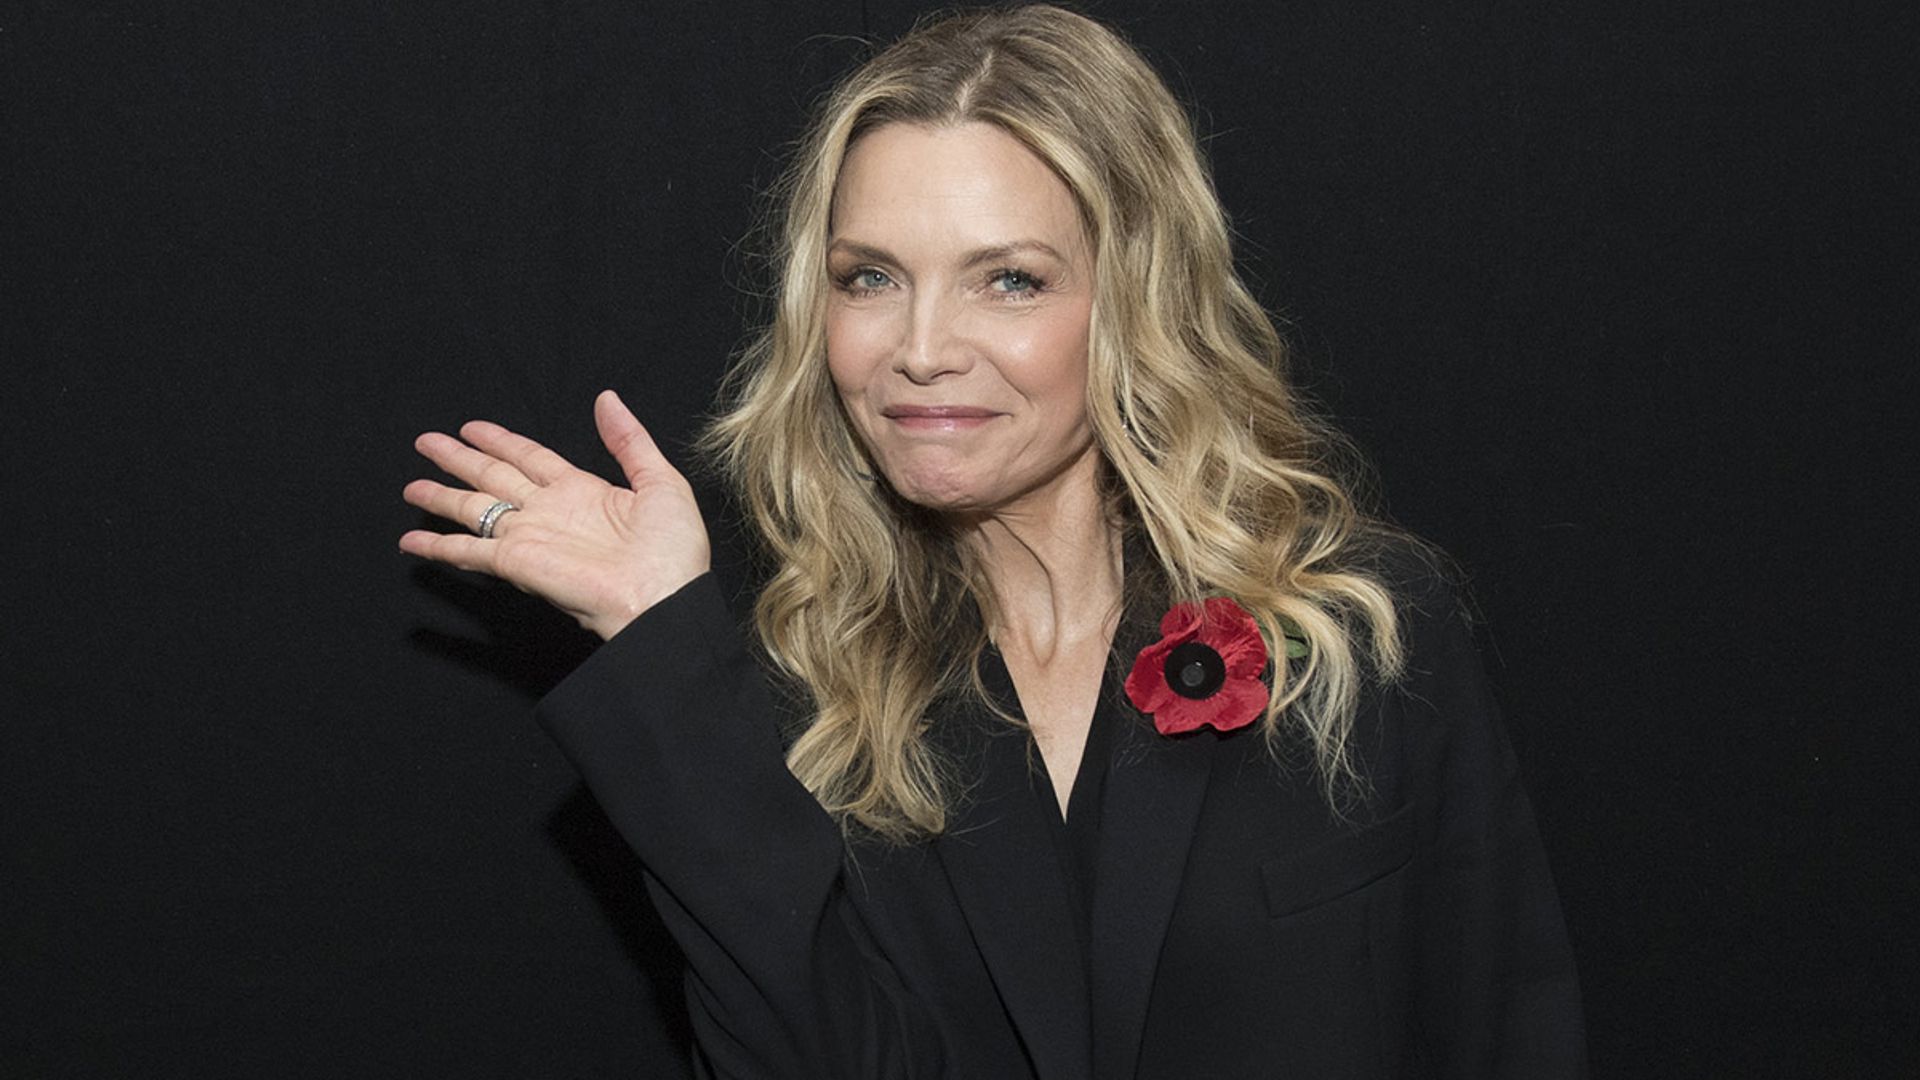 Michelle Pfeiffer reveals hilarious makeup faux pas - and we've all been there